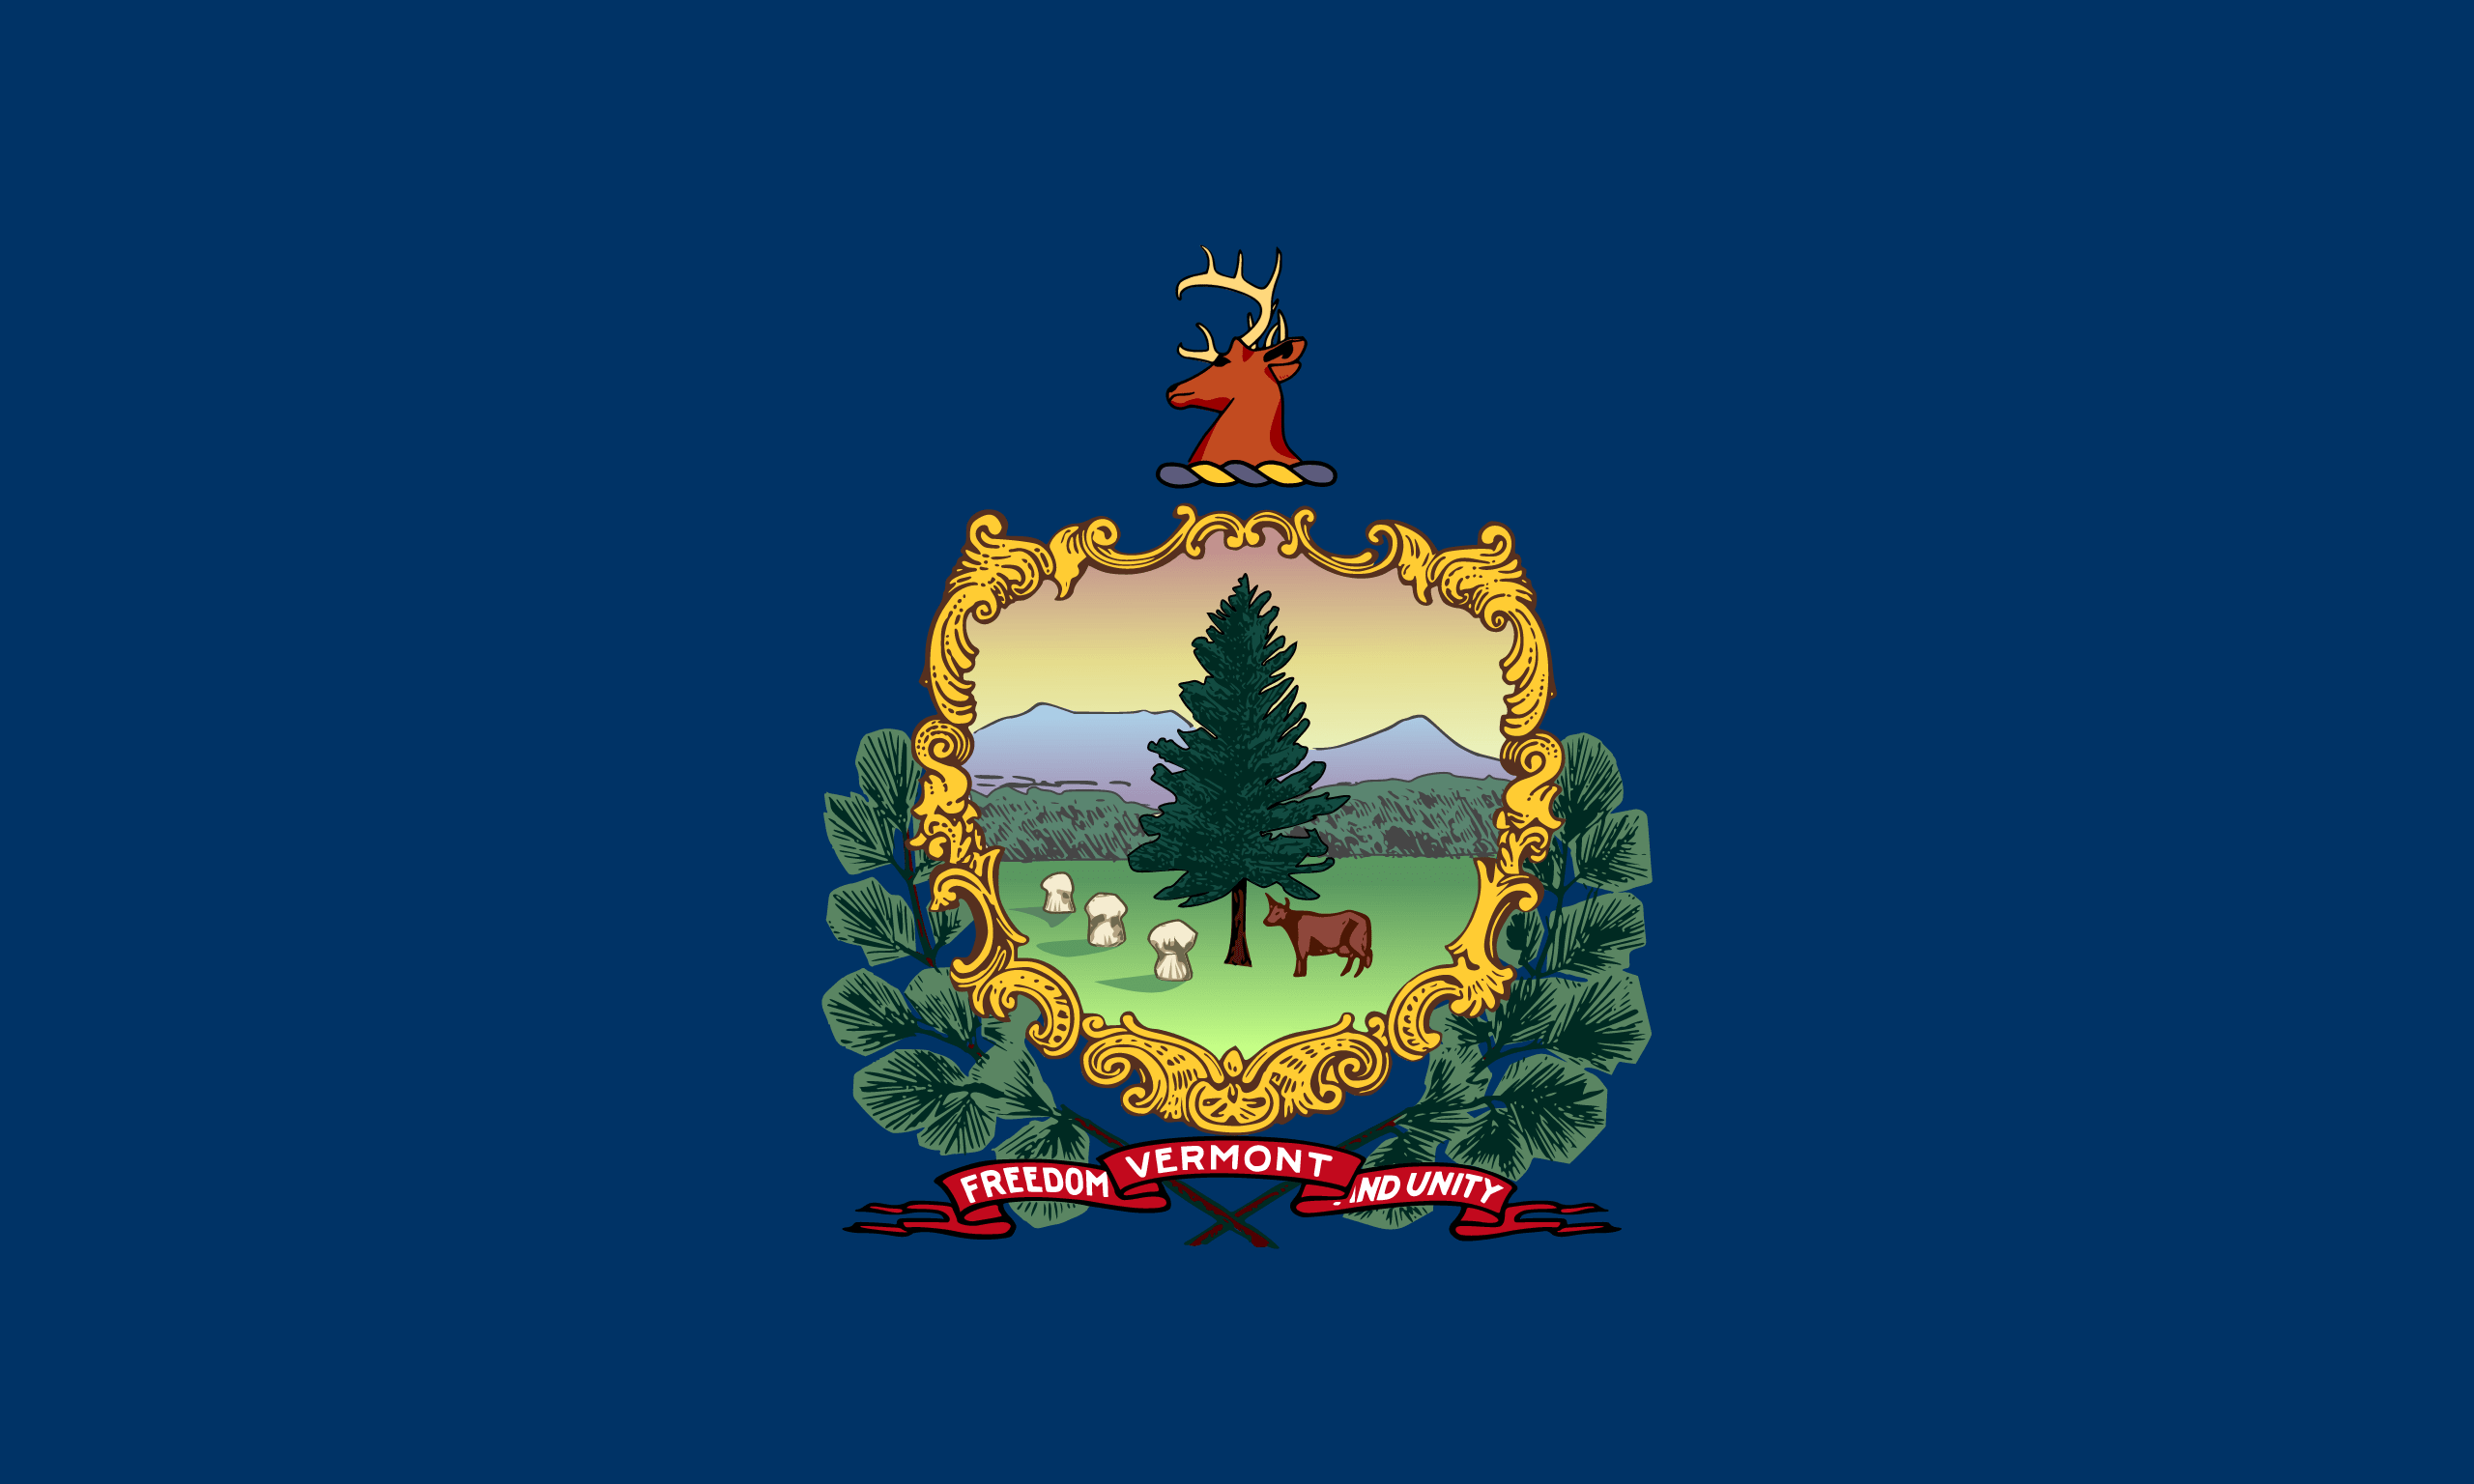 Vermont License Plate Lookup